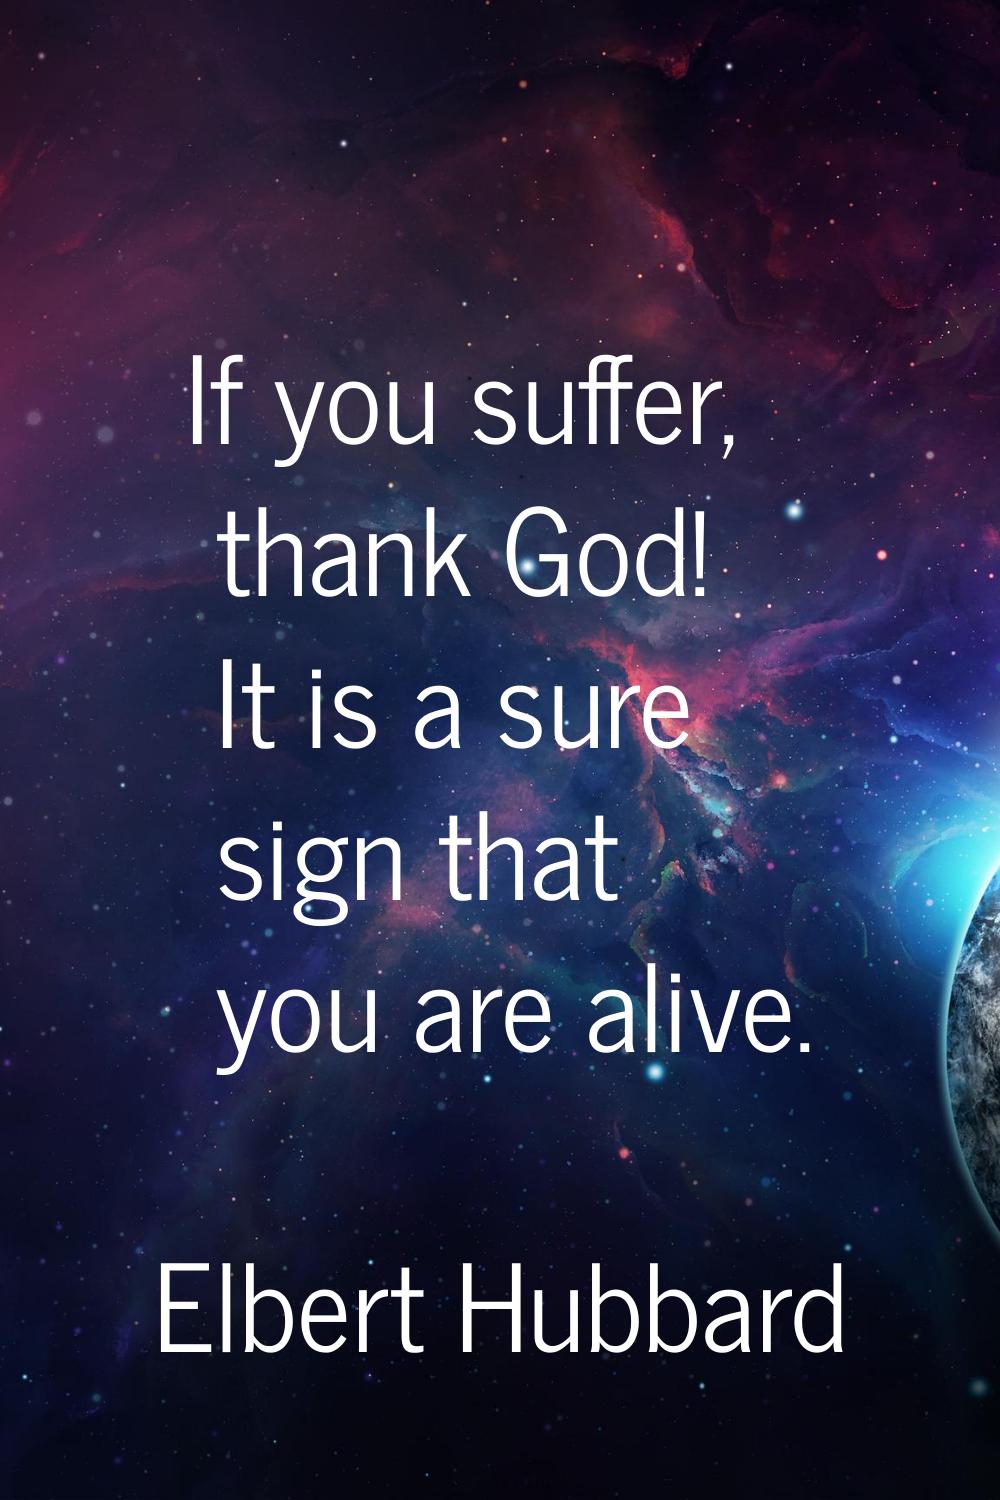 If you suffer, thank God! It is a sure sign that you are alive.